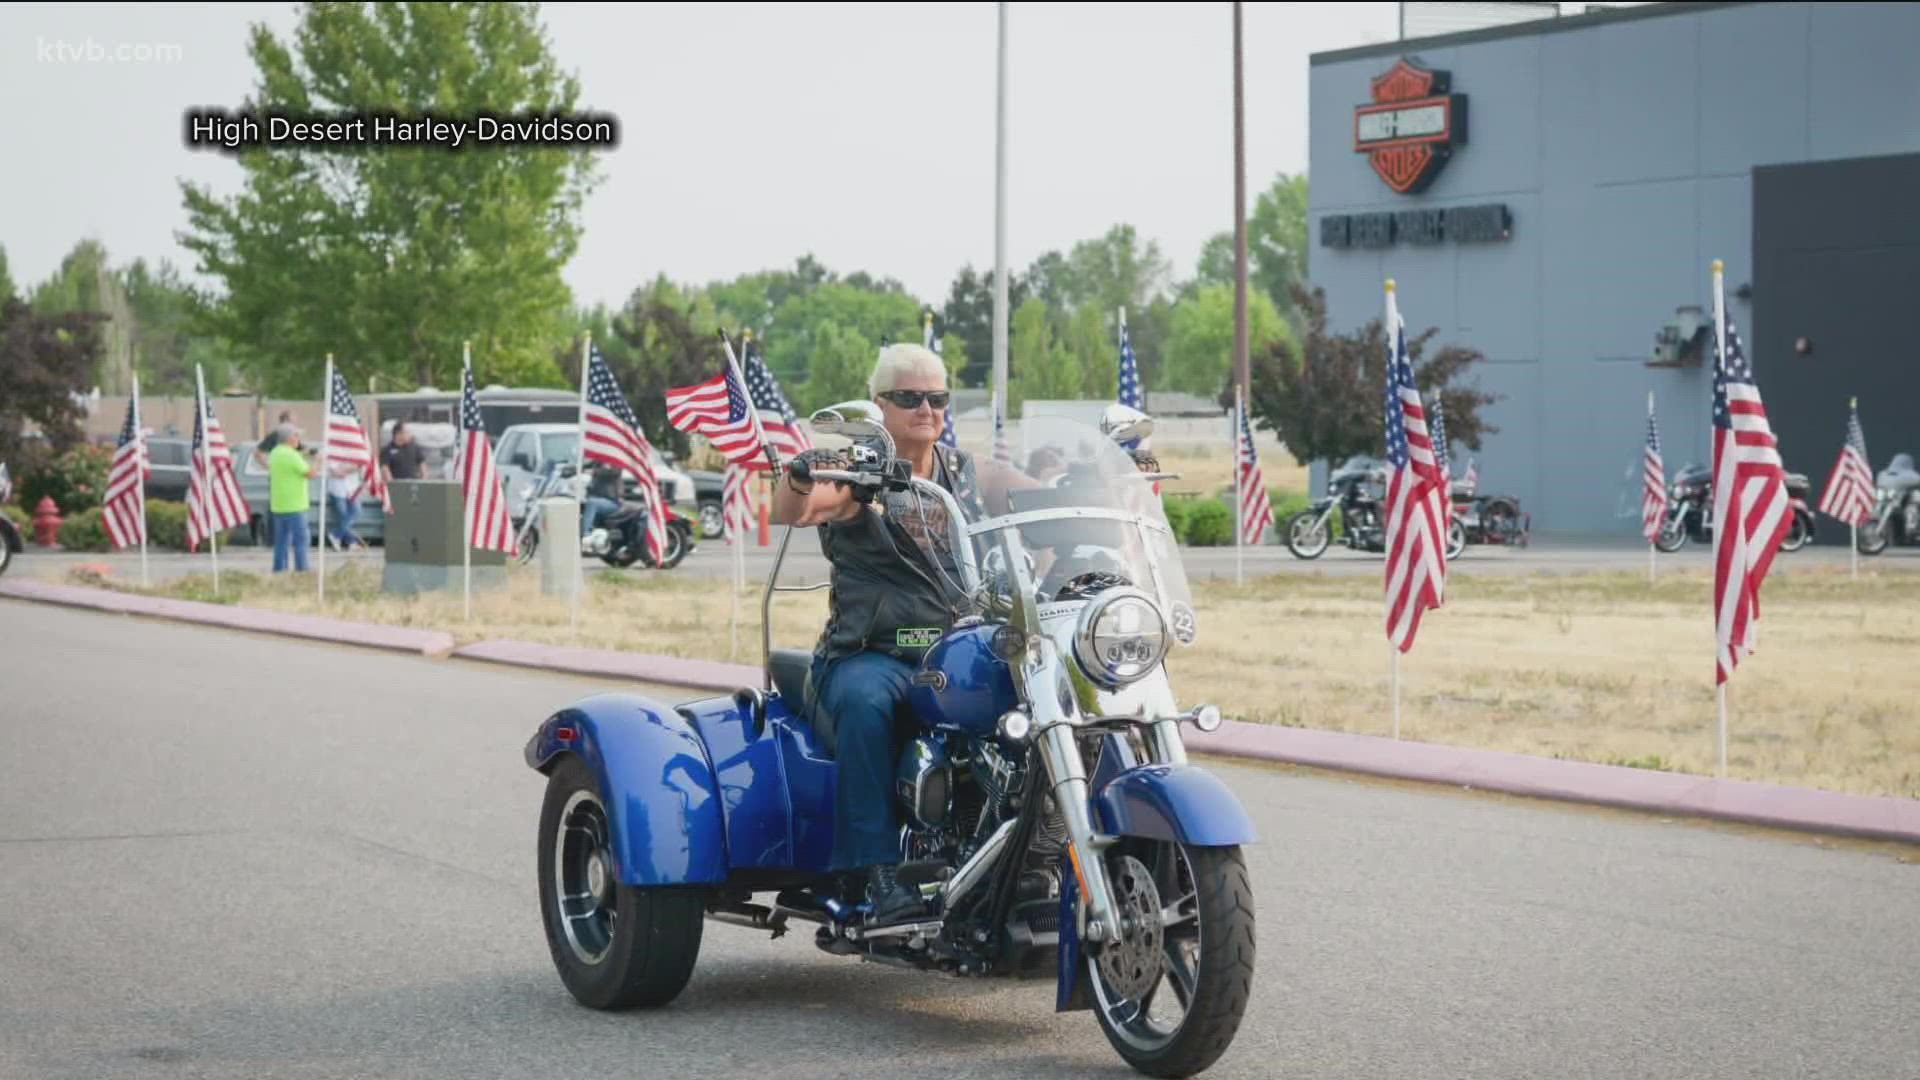 Idaho Patriot Thunder motorcycle ride delayed due to poor weather